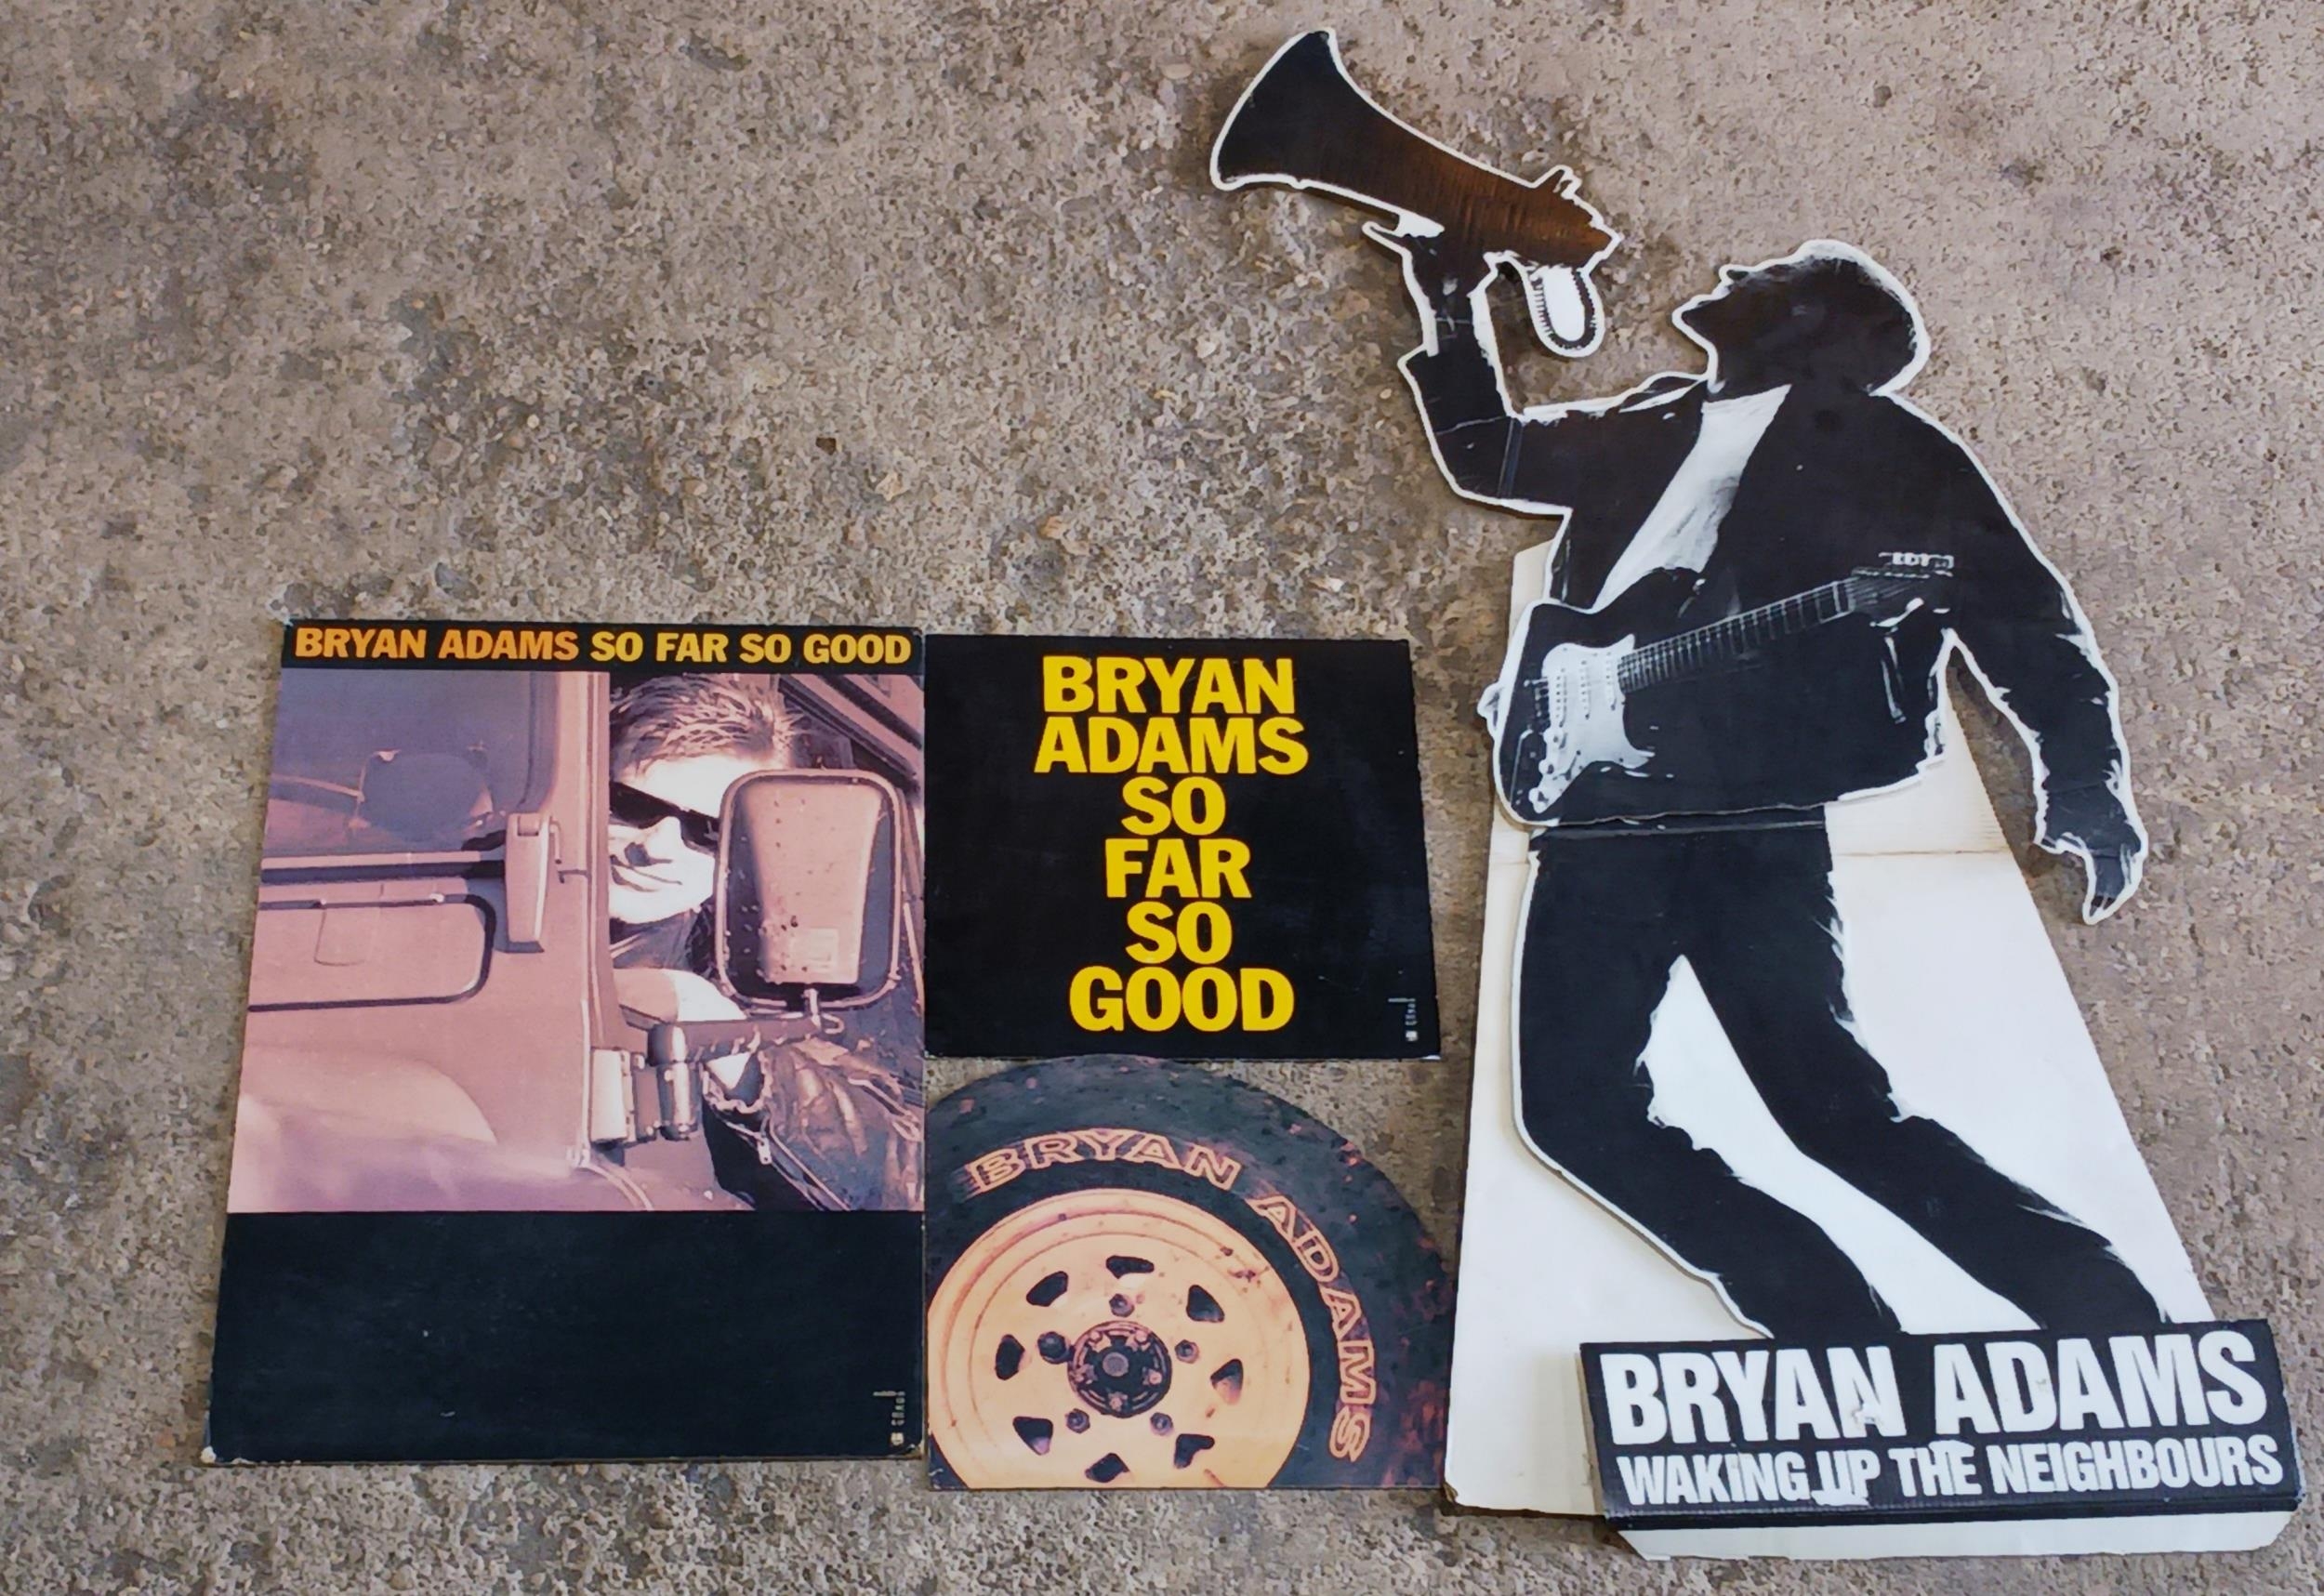 Bryan Adams 'waking up the neighbours' promotional cardboard cutout together with three other